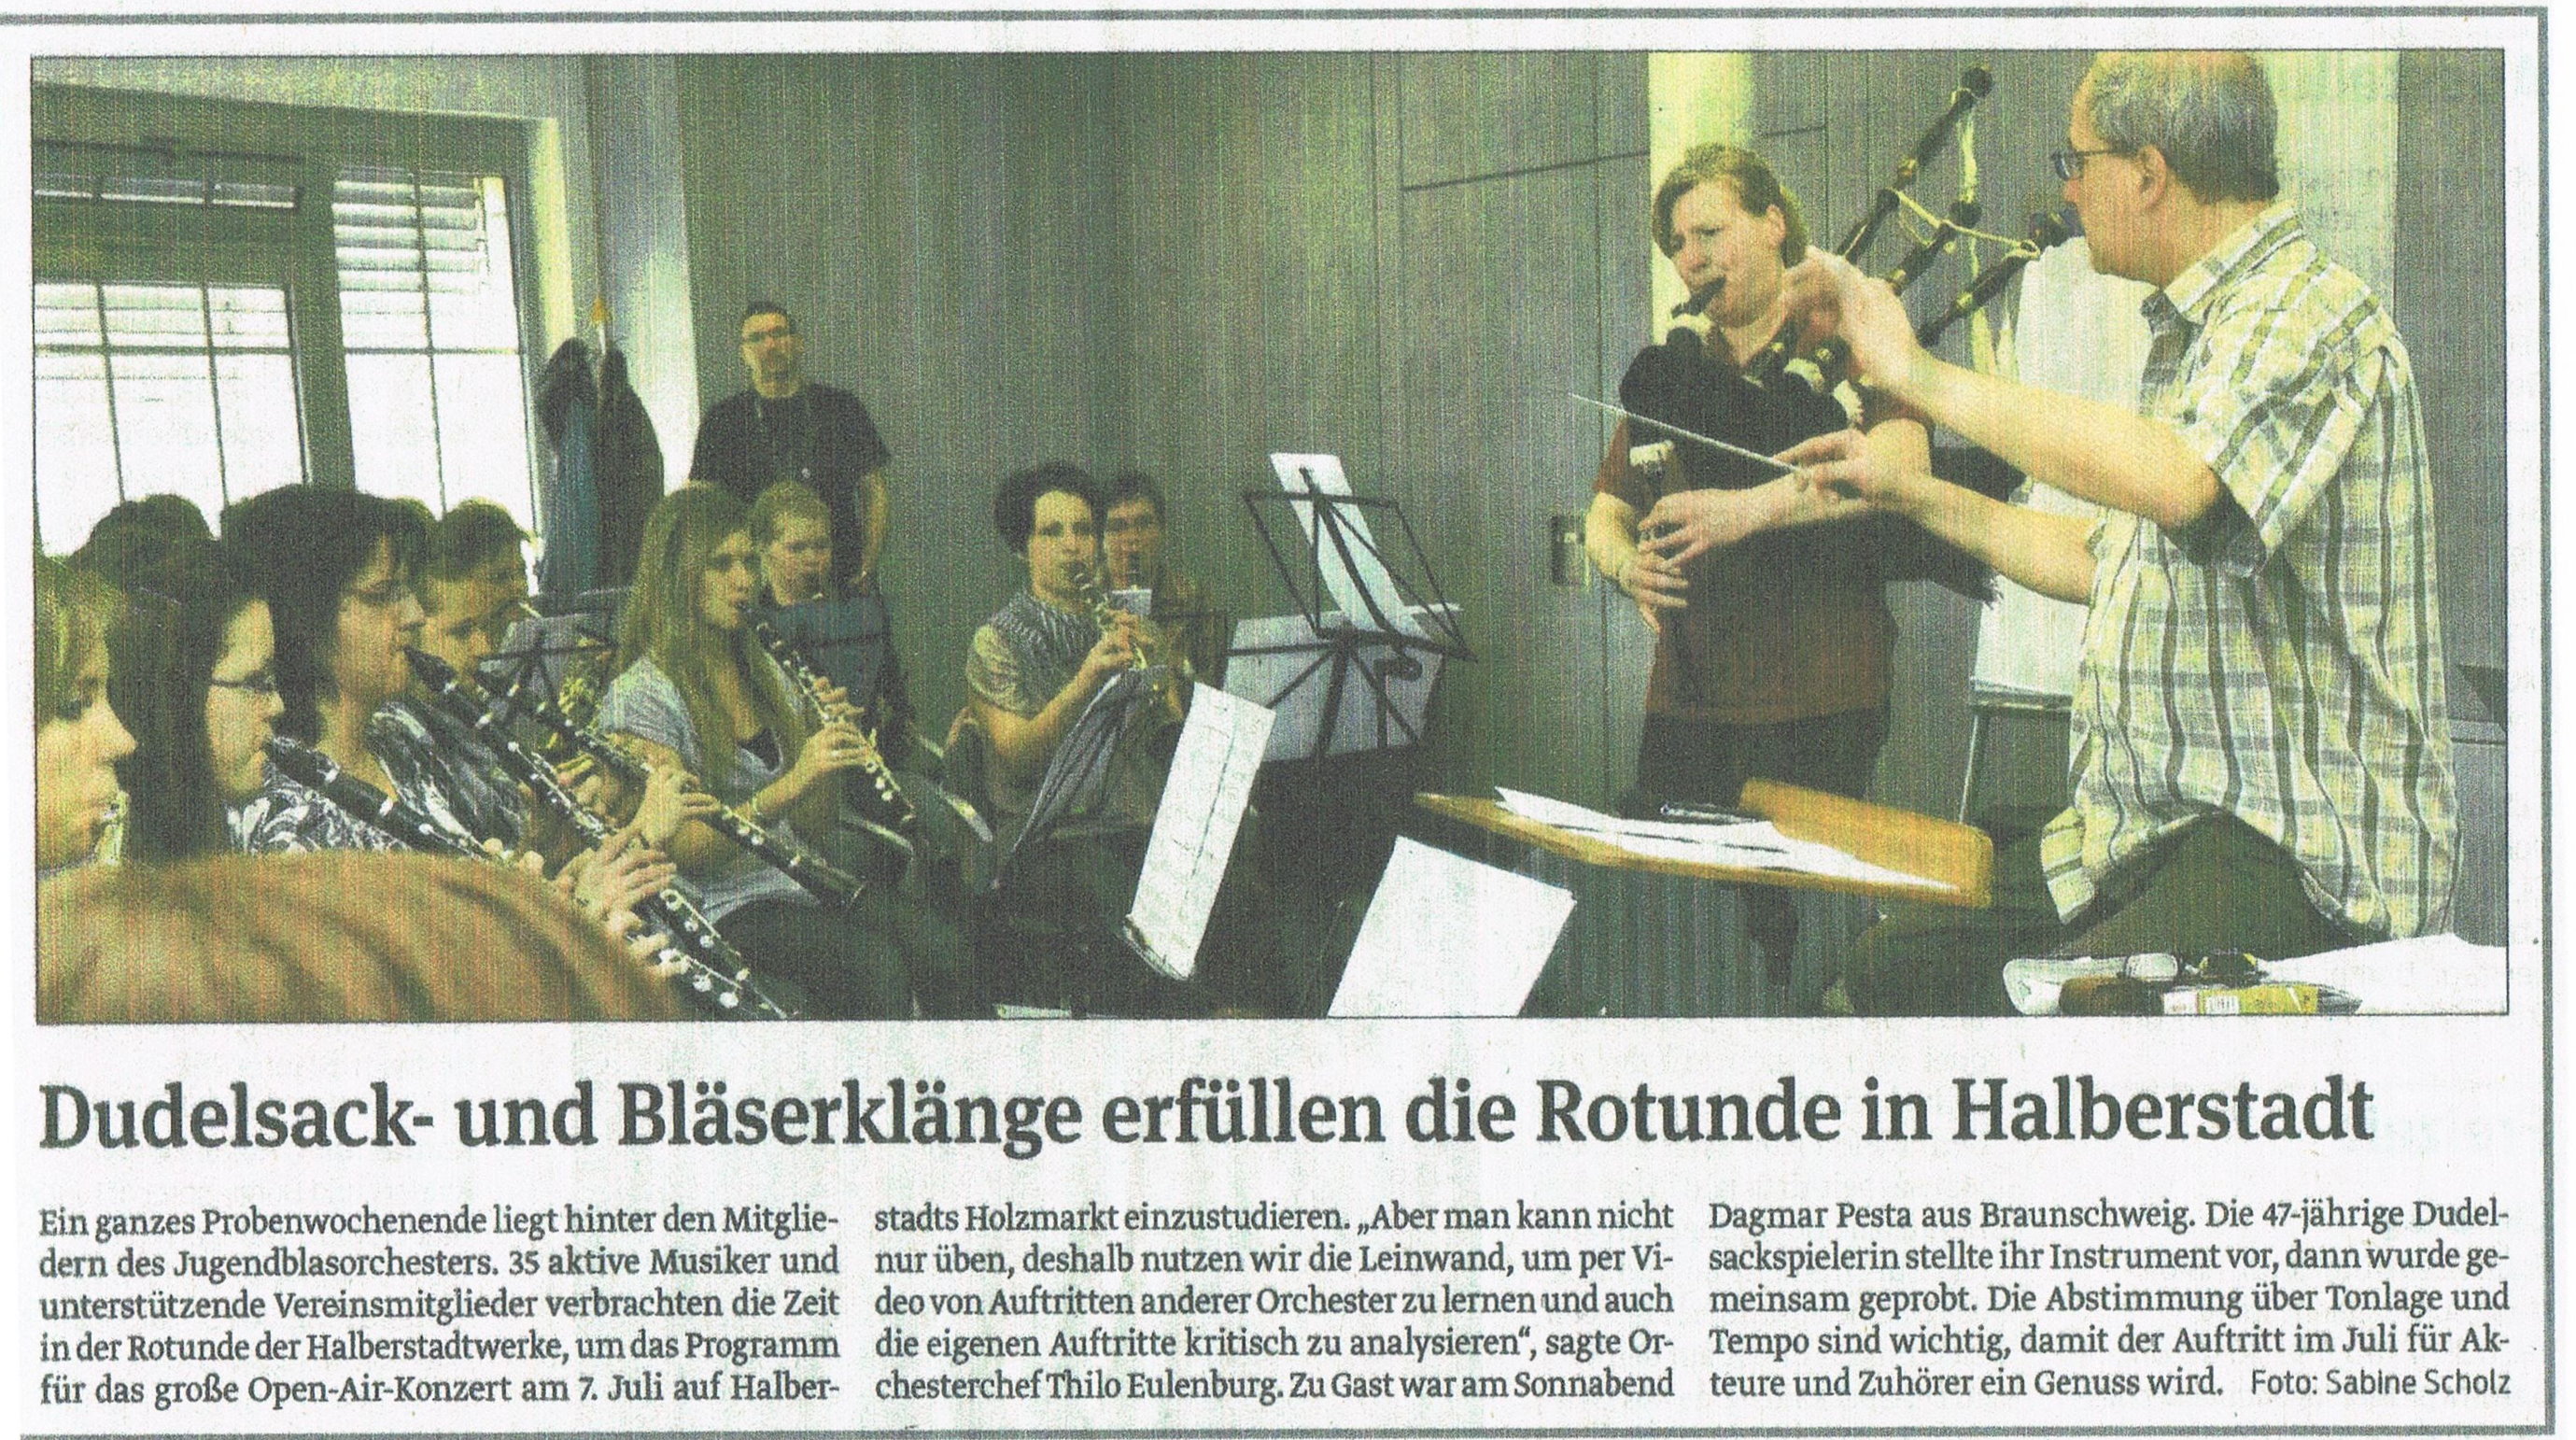 Bagpiper Dagmar Pesta practices with the Youth Brass Orchestra Halberstadt